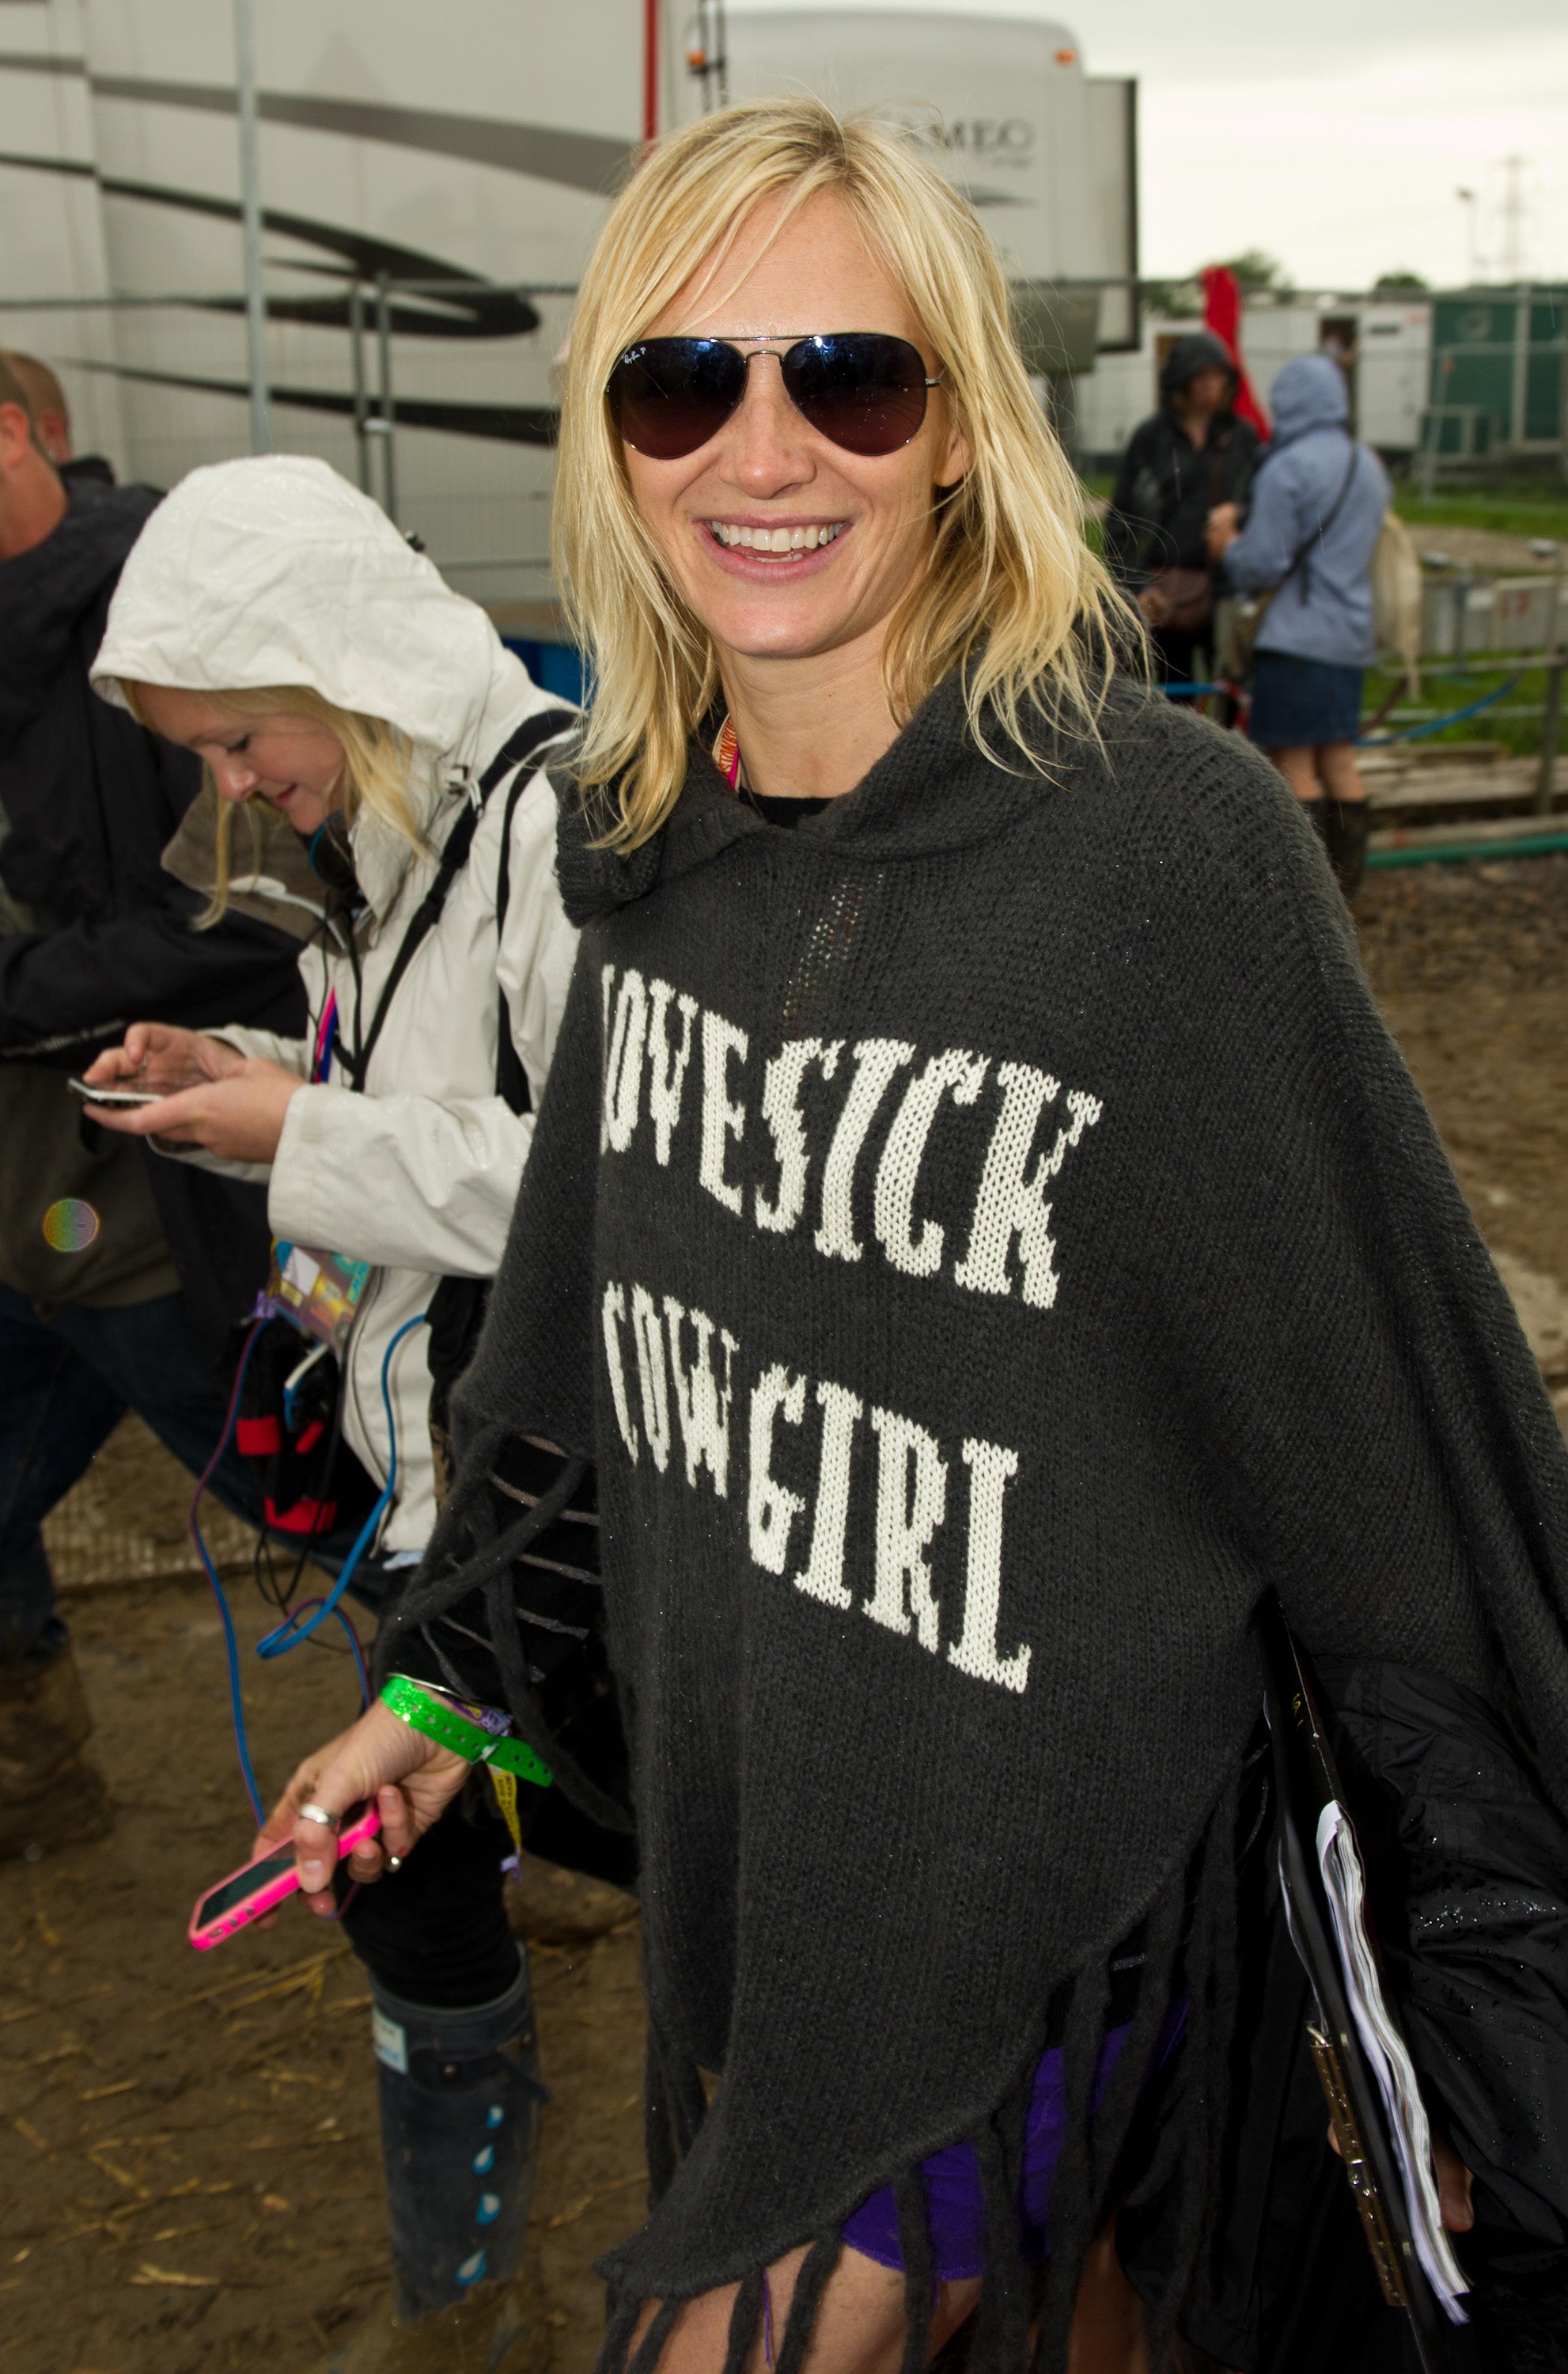 jo whiley, glastonbury, jo whiley says middle age won’t stop her glastonbury appearances